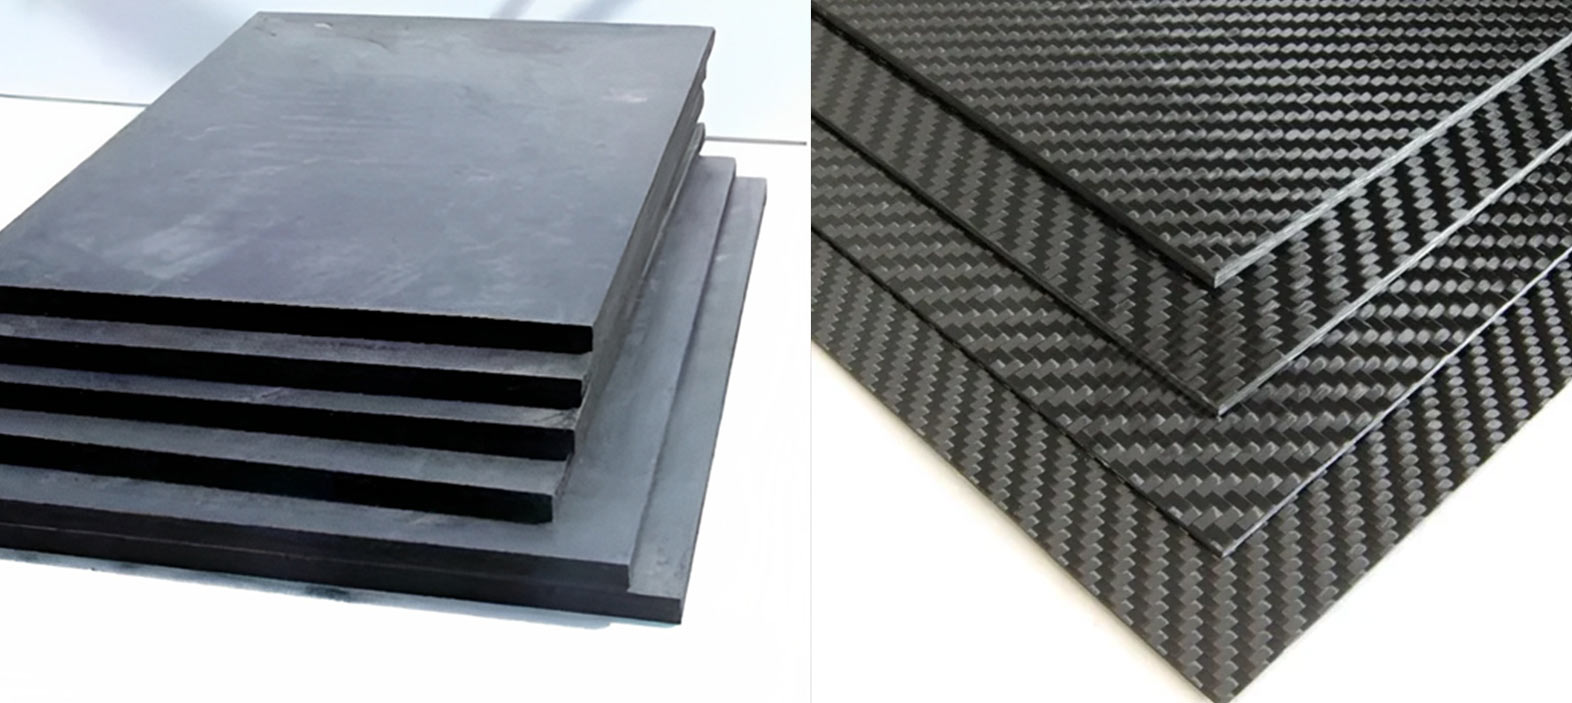 Know the Difference Between Carbon Fiber Sheets and Carbon Fiber Plates? -  NitProcomposites